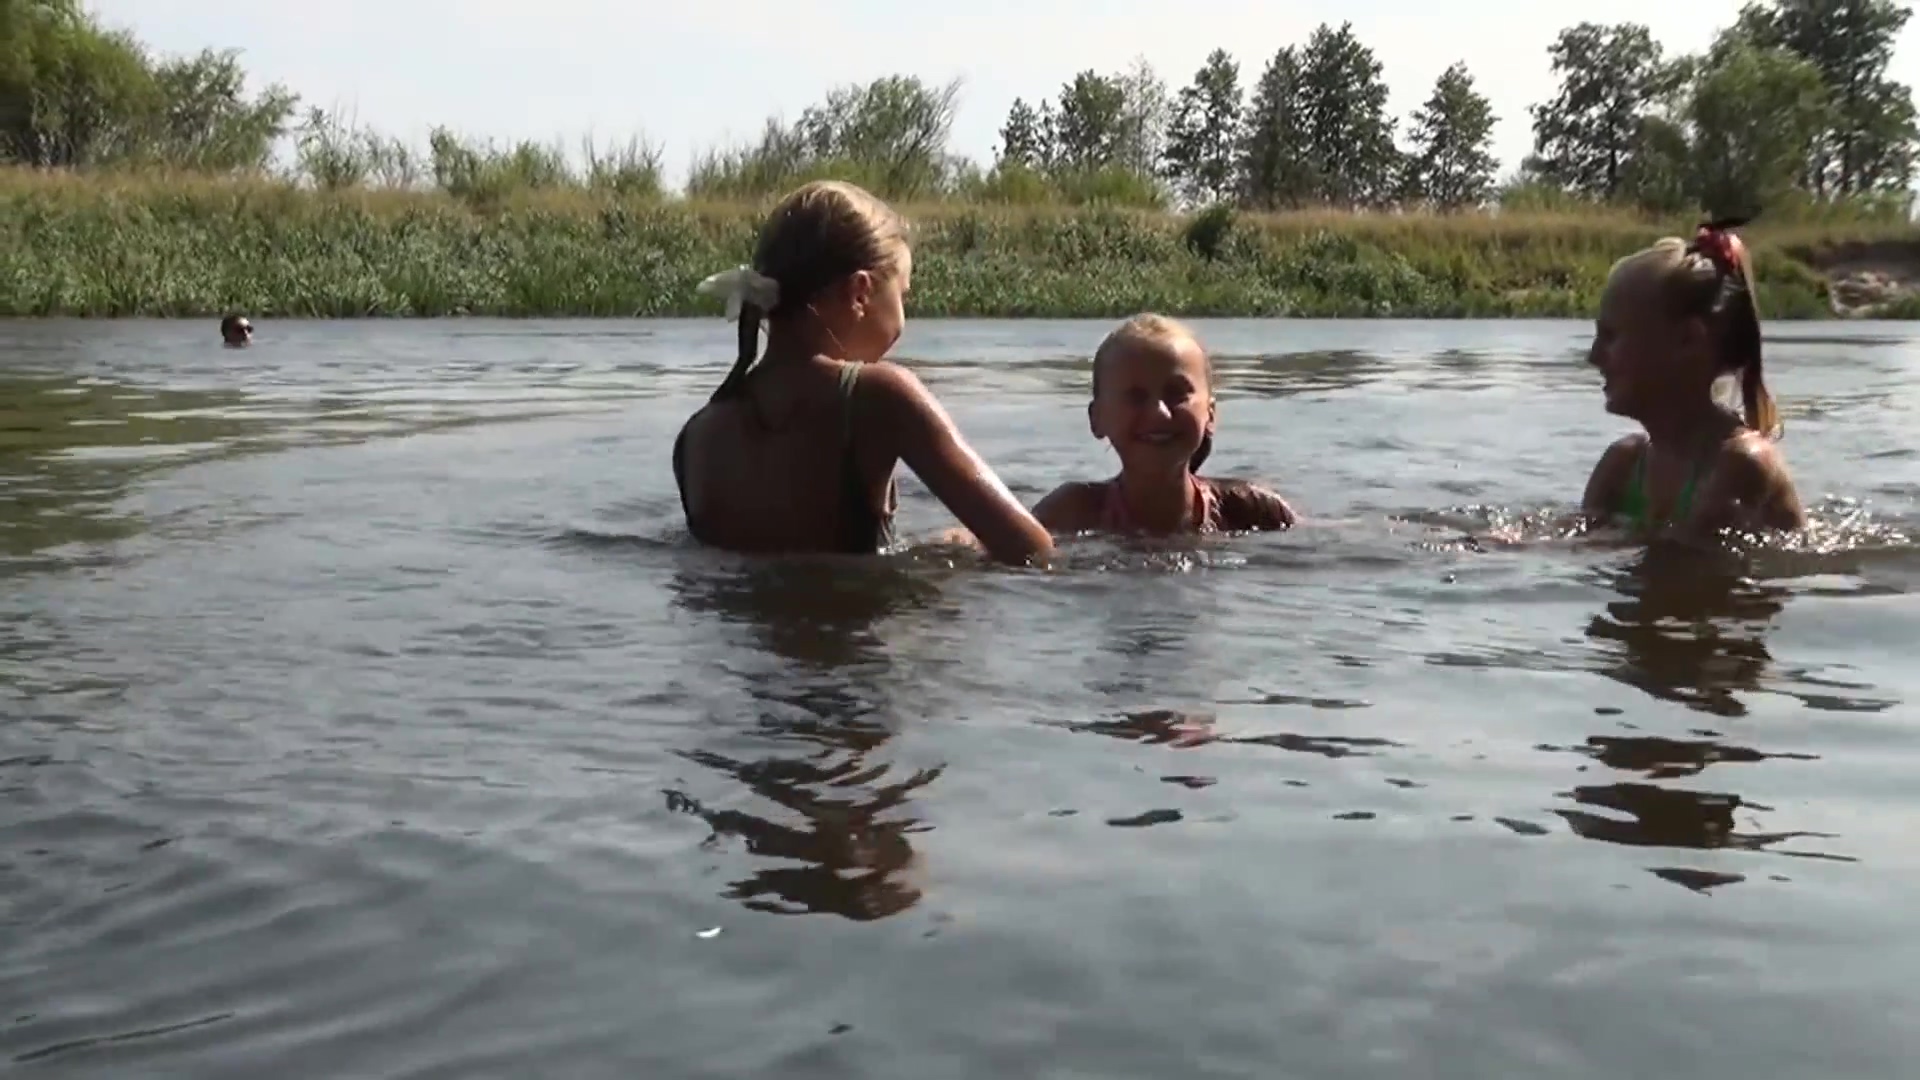 Children and the river_1080p.mp4